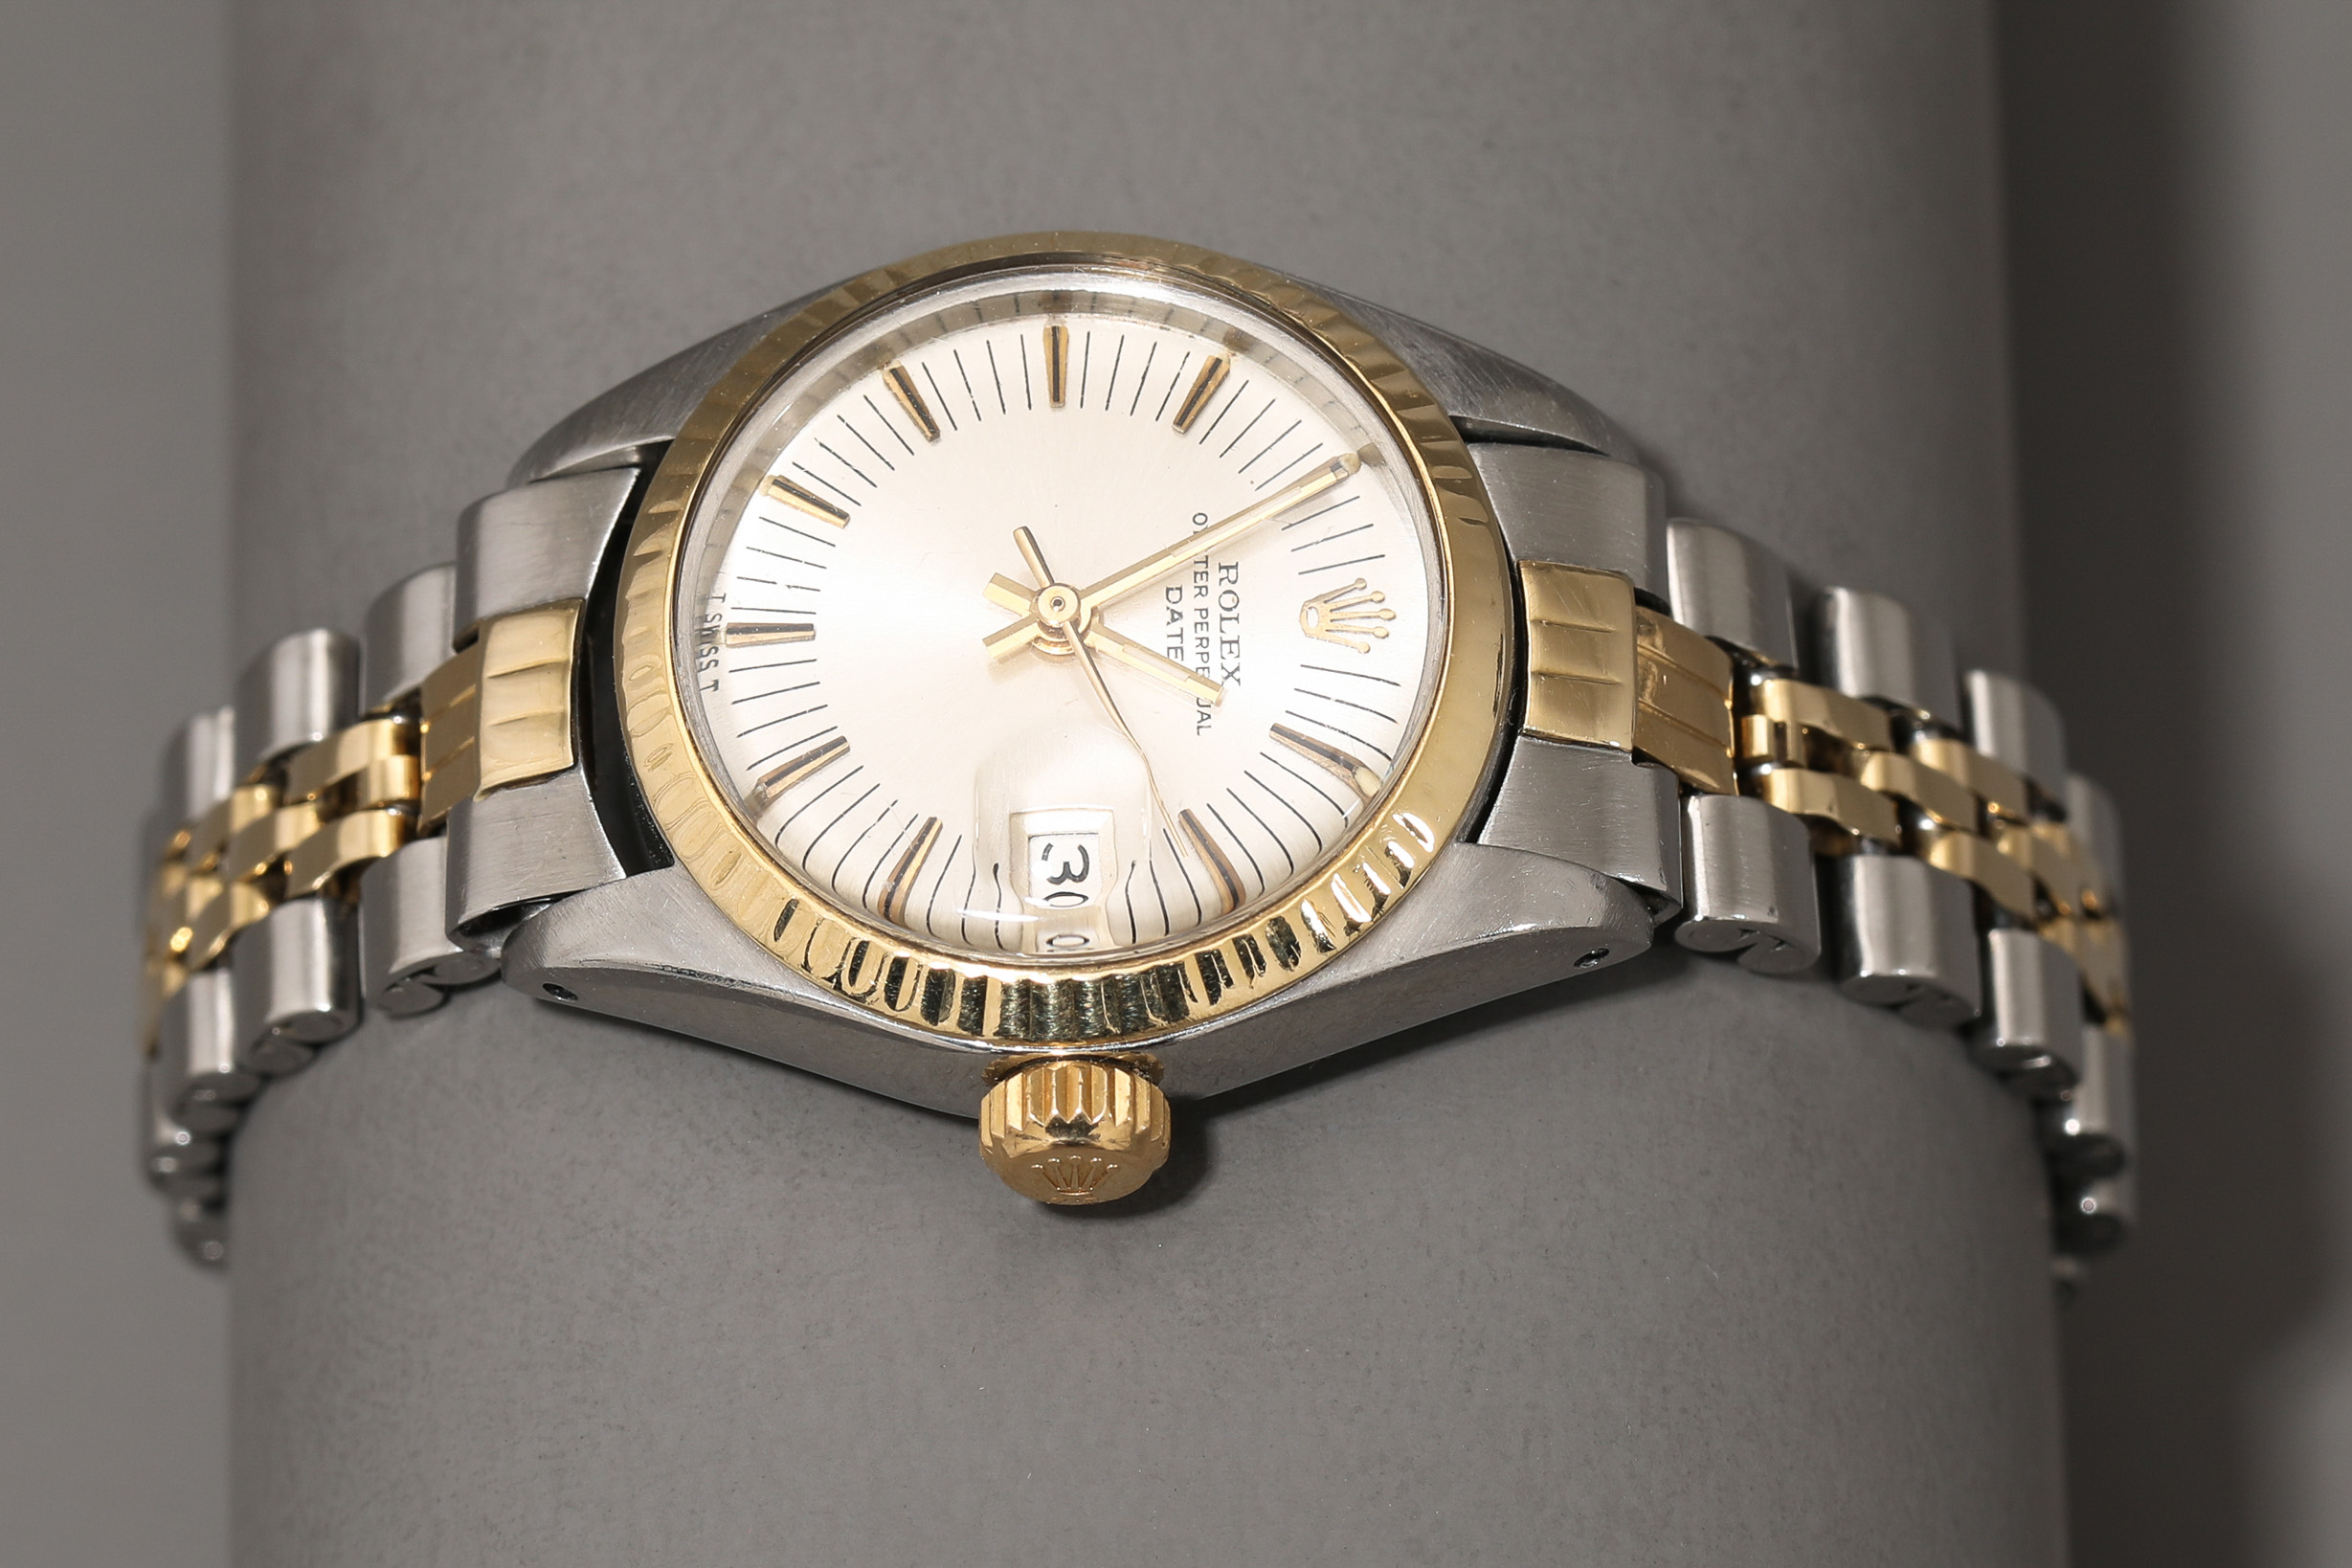 Rolex Oyster Perpetual Lady Date Ref. 6917. Automatic women's watch - Image 4 of 9